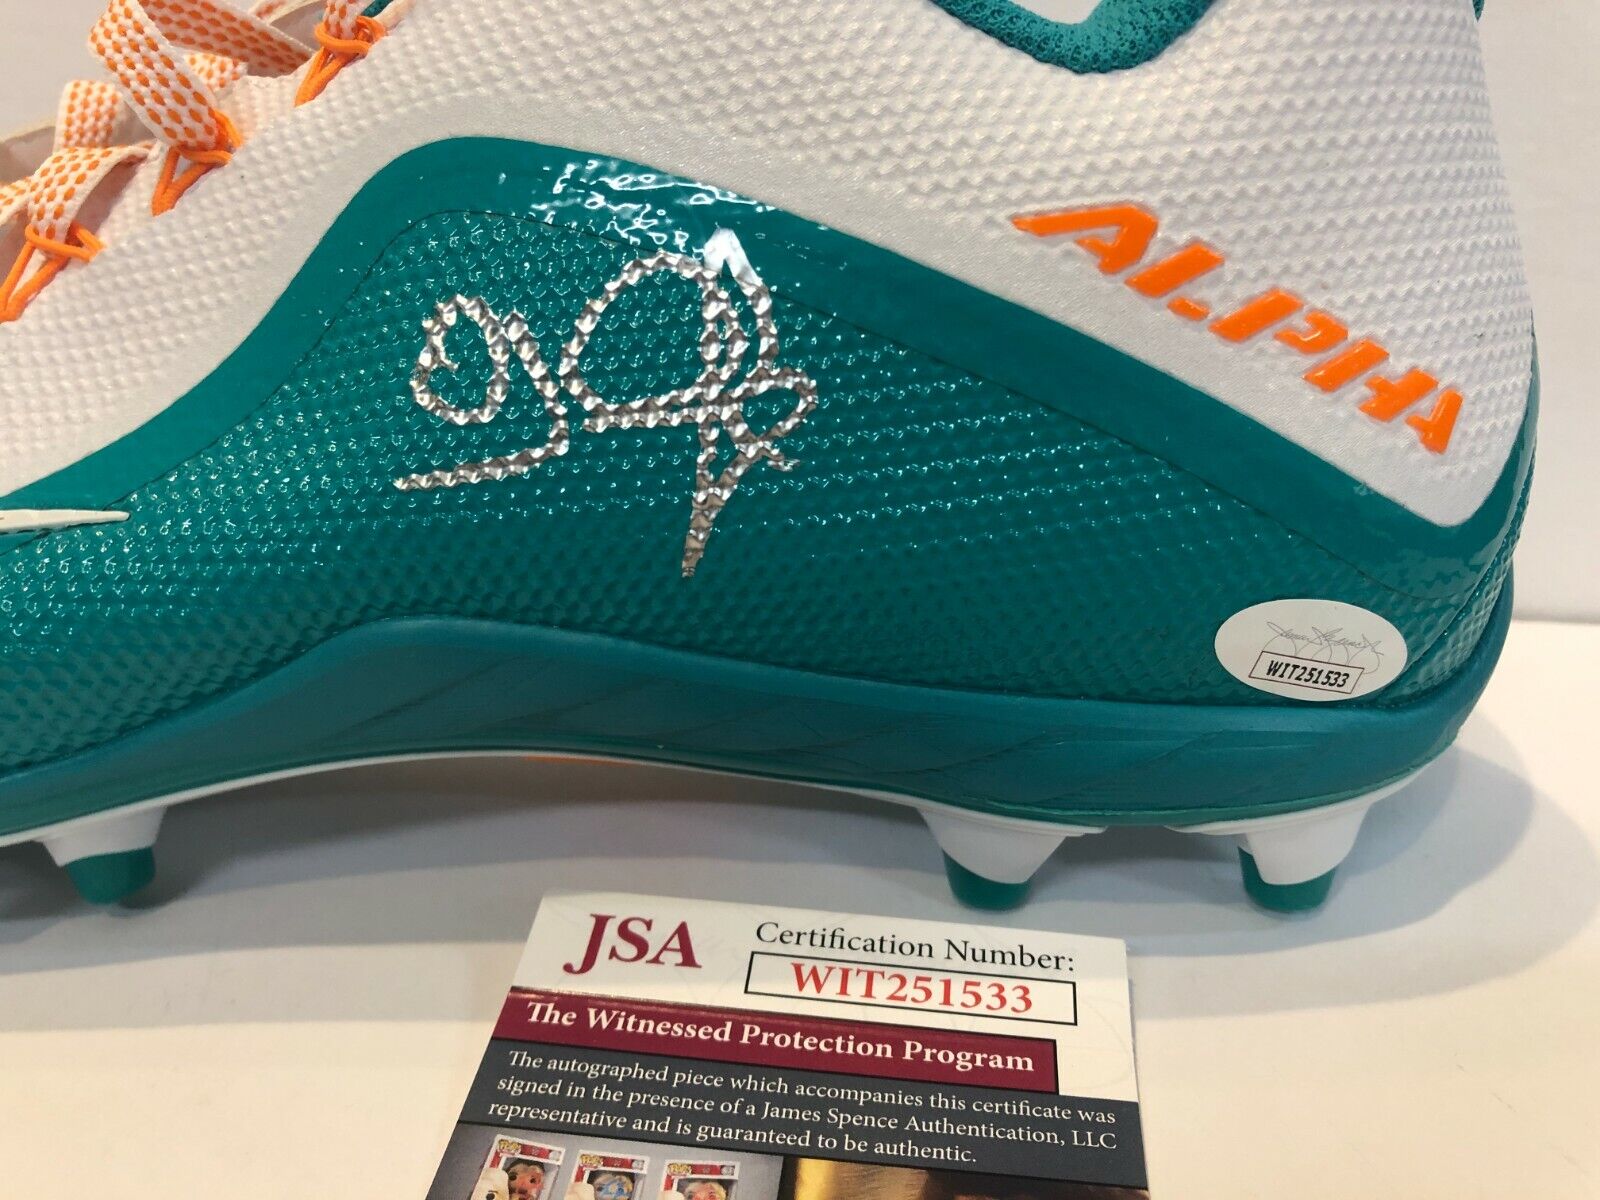 MVP Authentics Miami Dolphins Oj Mcduffie Autographed Signed Nike Cleat Jsa Coa 125.10 sports jersey framing , jersey framing